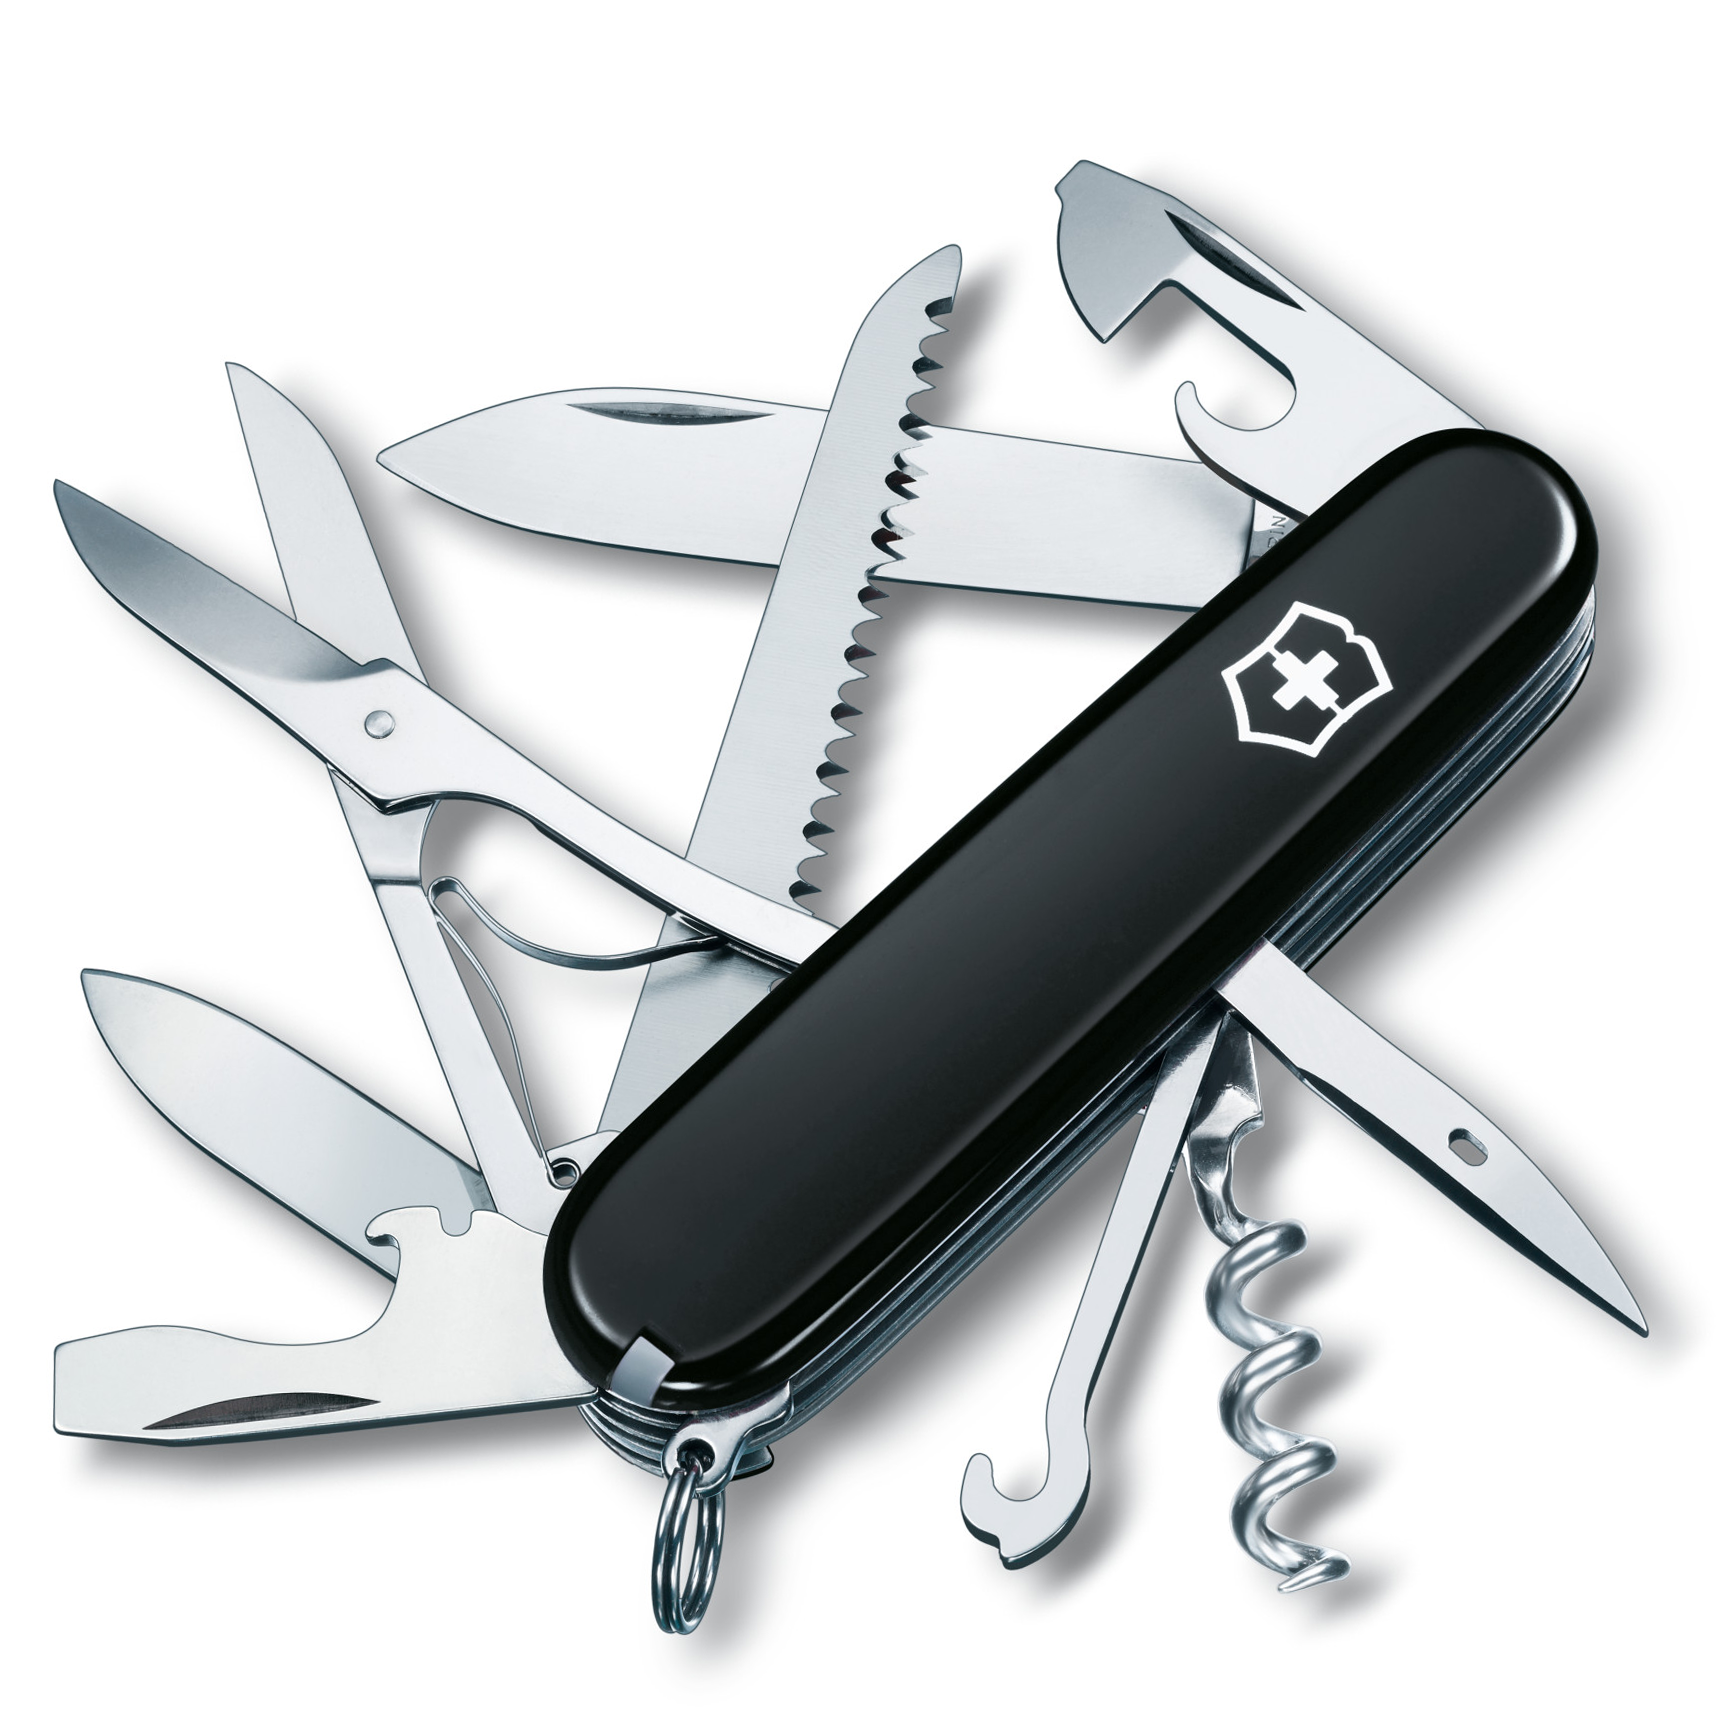 MINI TOOLS Specially designed for the - Victorinox Cyprus